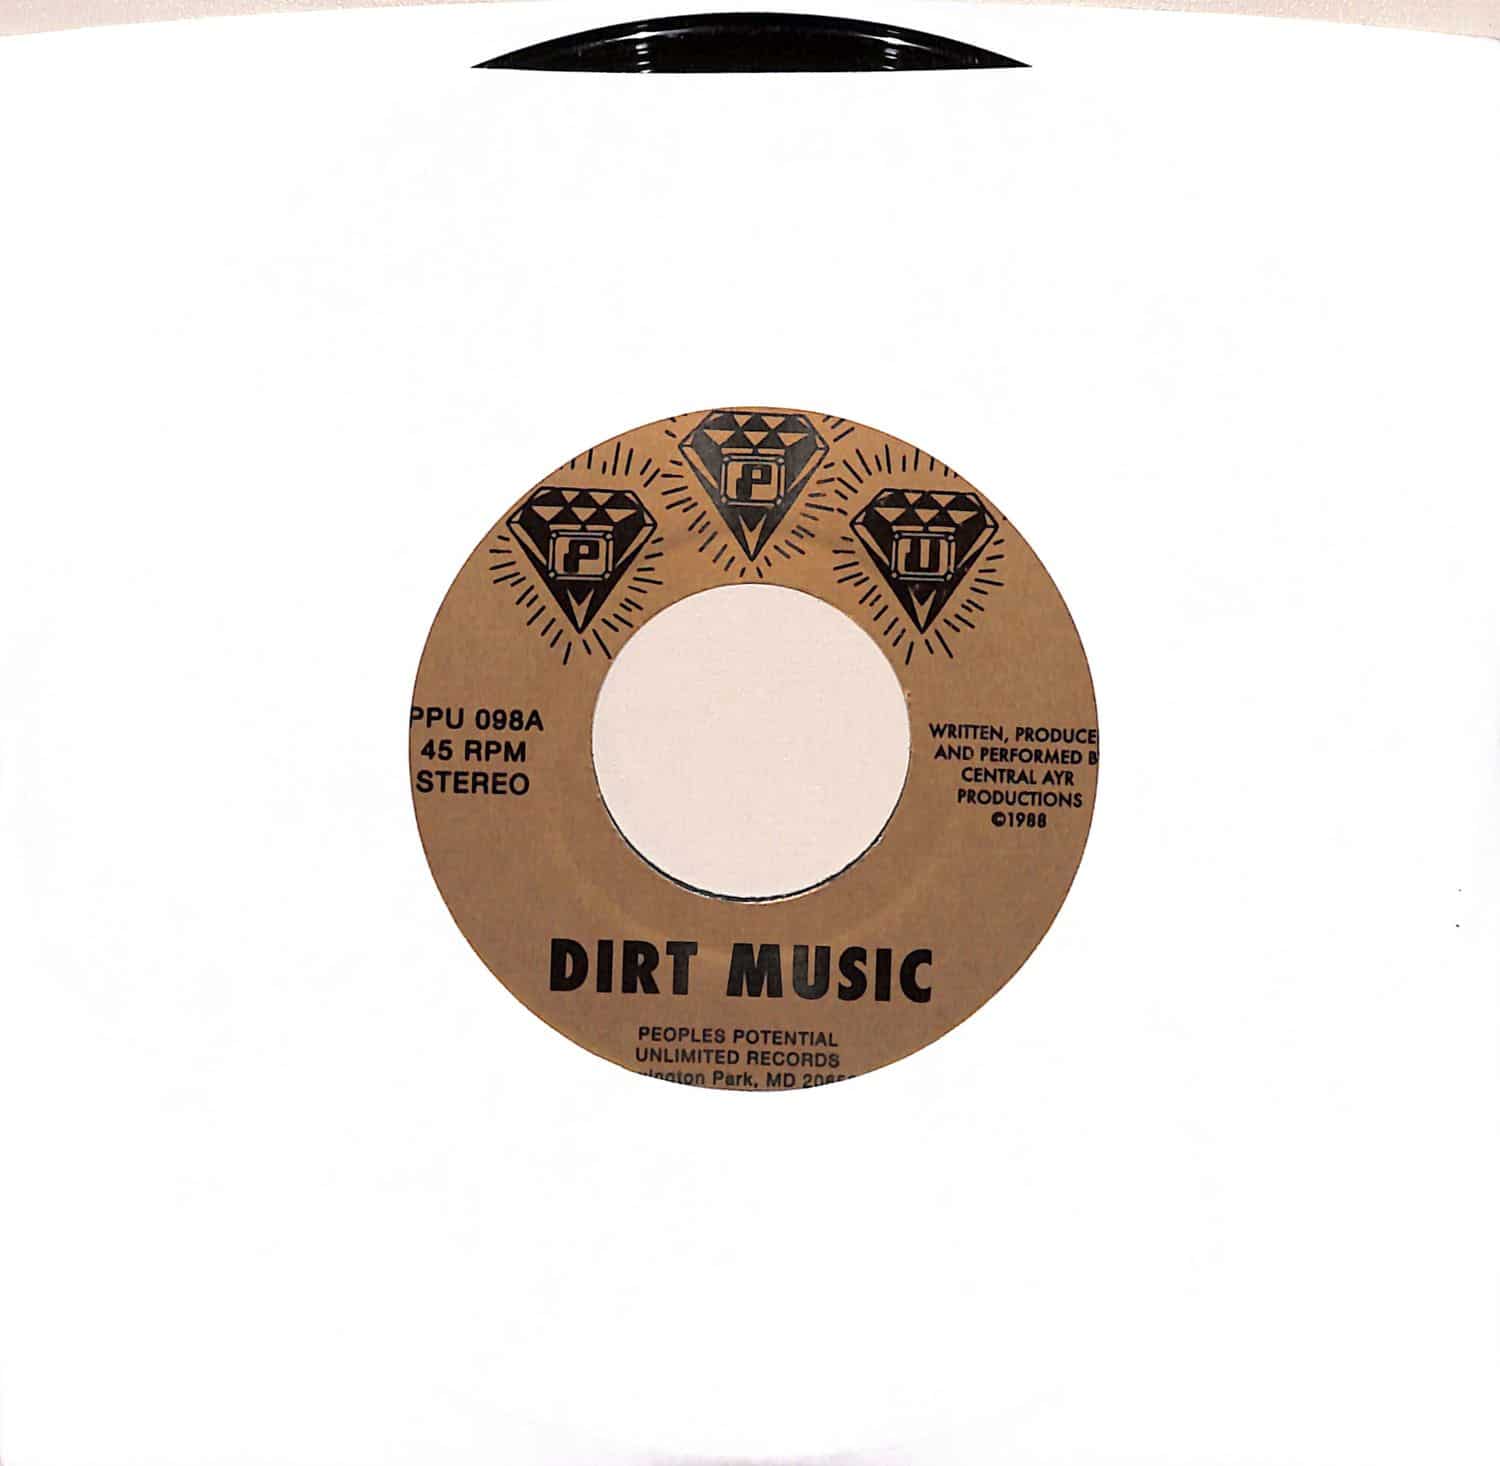 Central Ayr Productions - DIRT MUSIC 